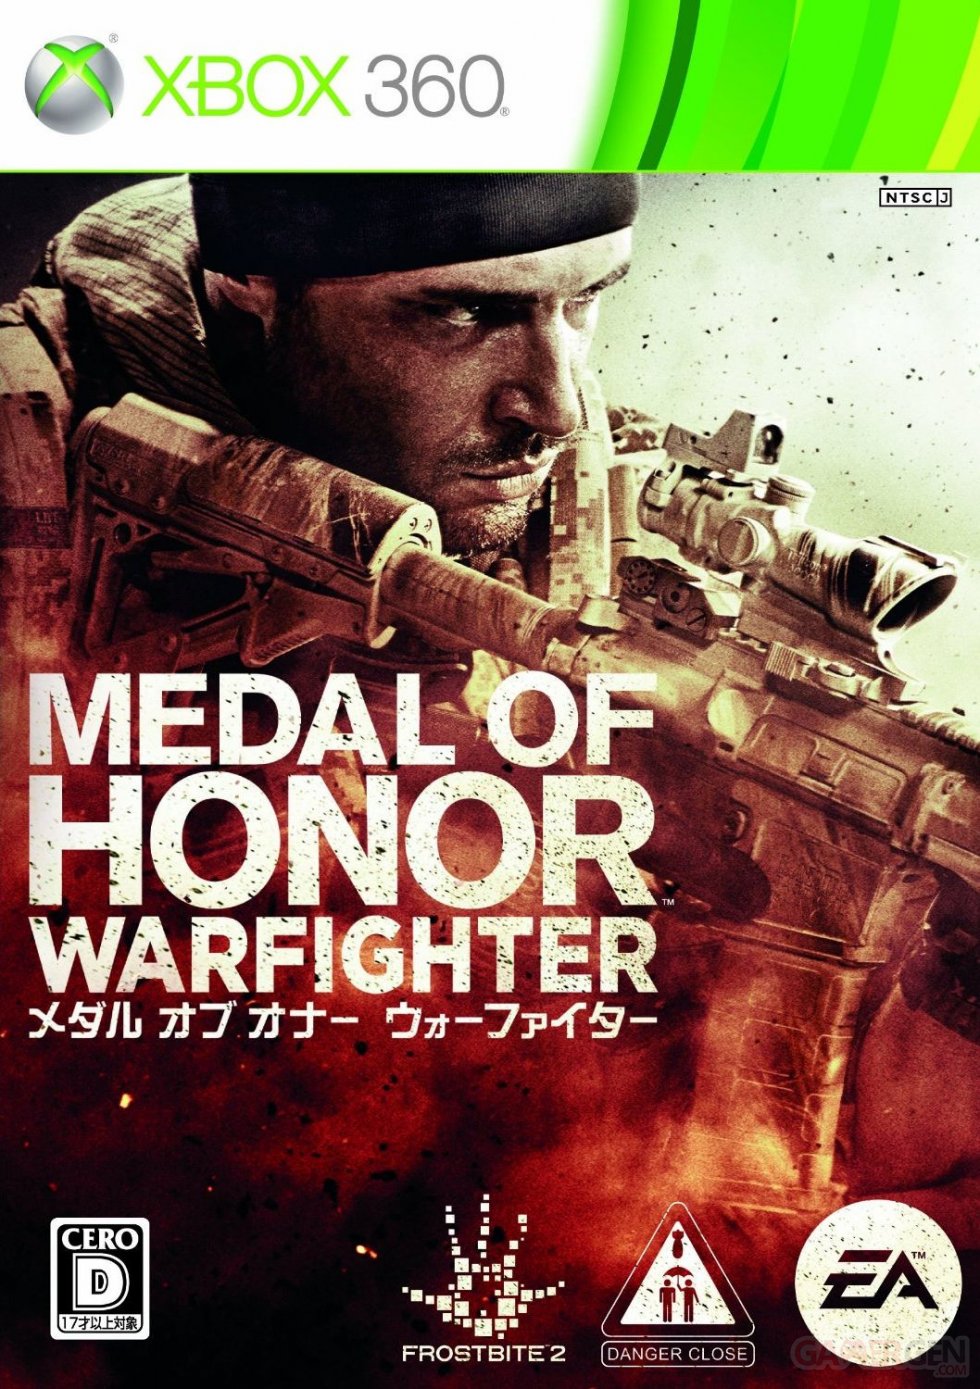 Medal of Honor Warfighter jaquette japonaise xbox 01.08.2013.